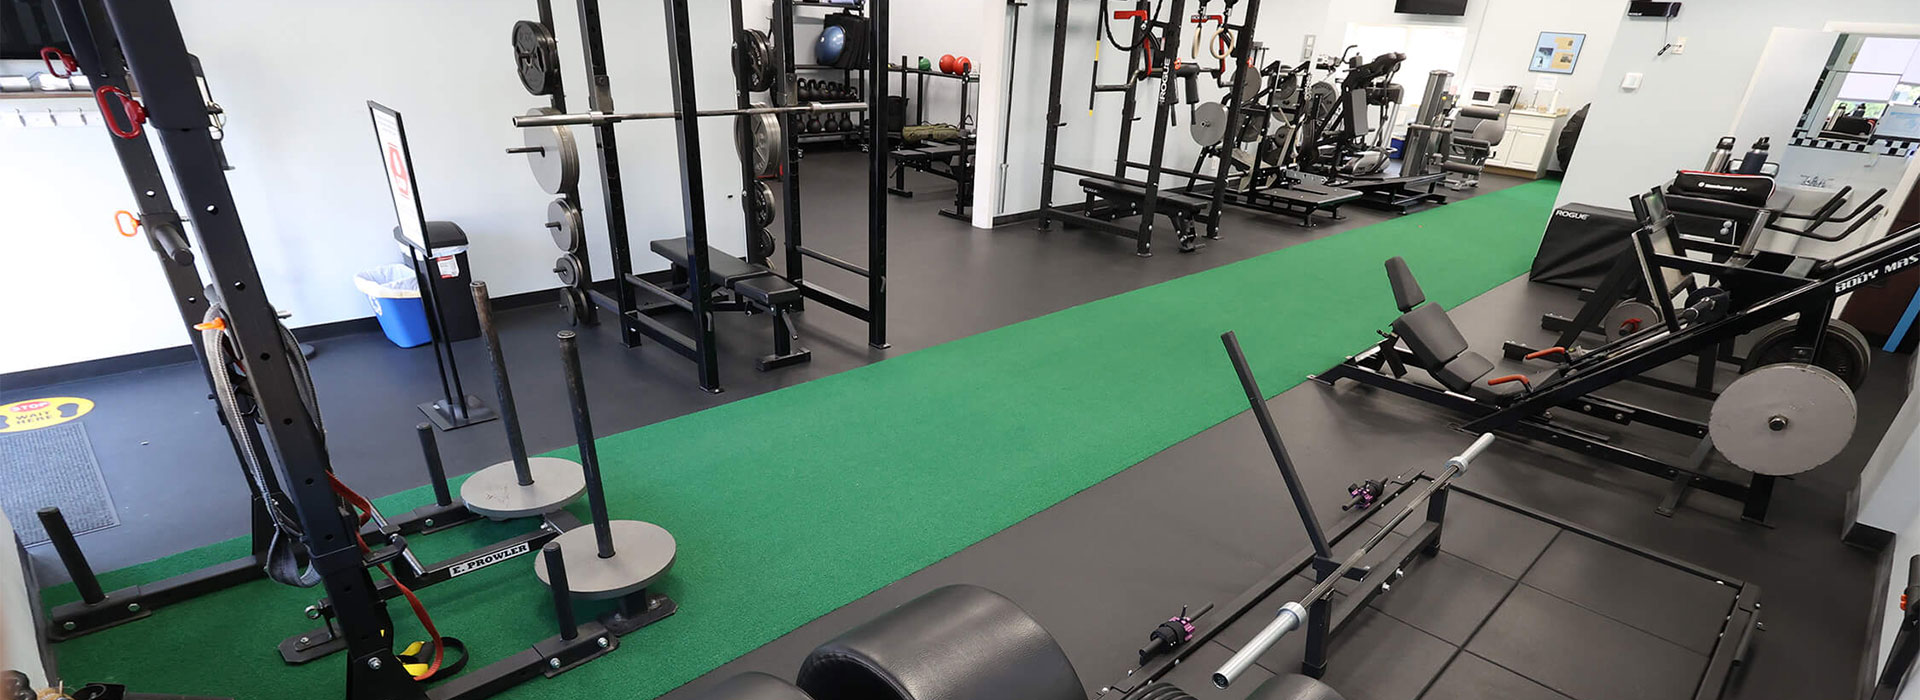 Why WILL POWER One-on-One Training Is Ranked One of the Best Gyms In Thornwood